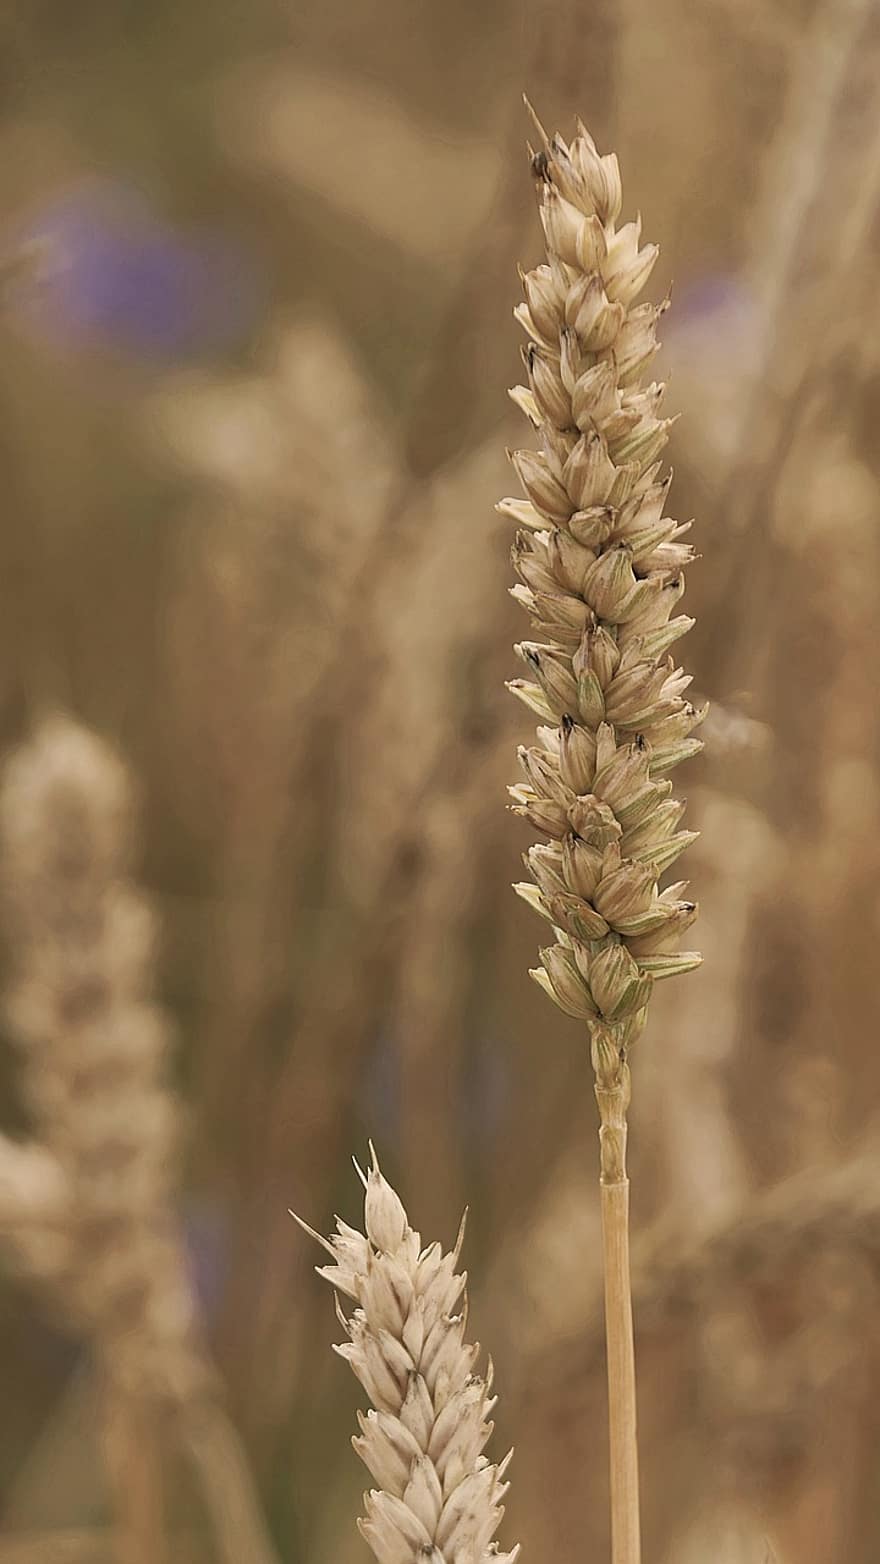 Epi, Wheat, On The Ground, Agriculture, Nature, Summer, Close Up